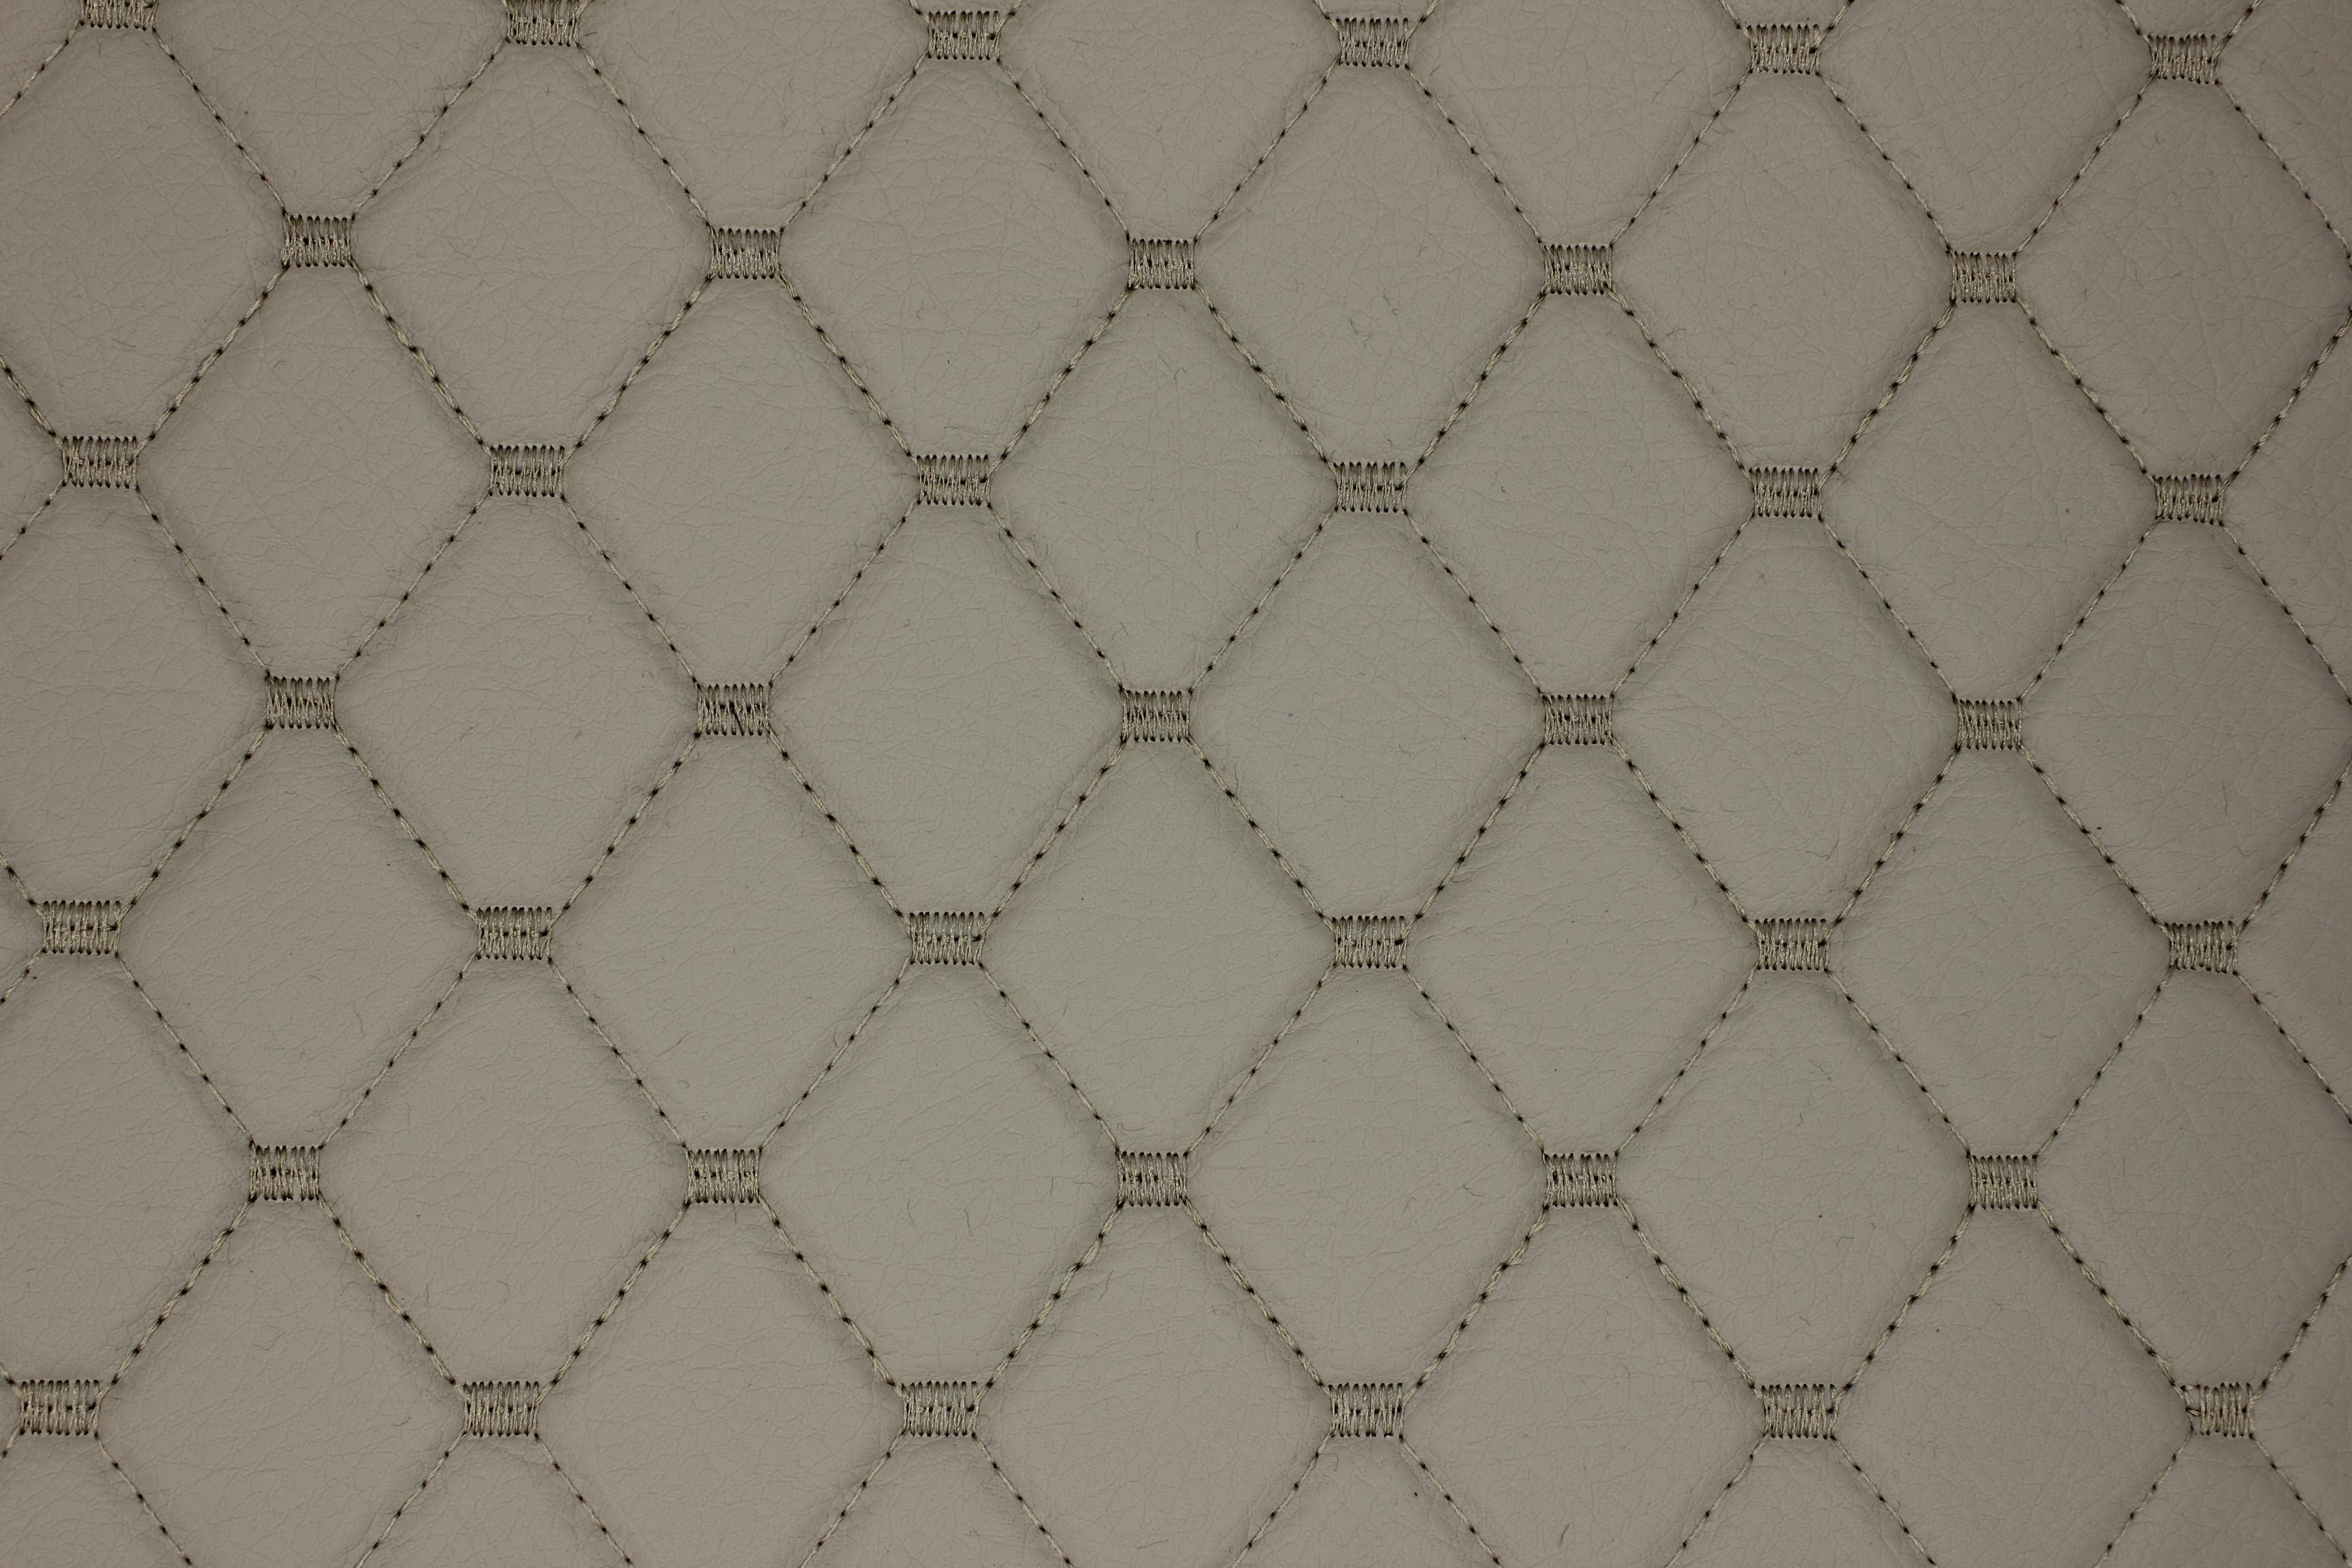 Beige Quilted Beige Vinyl Faux Leather Car Upholstery Fabric | 2"x2" 5x5cm Diamond Stitch with 5mm Foam | 140cm Wide | Automotive Projects